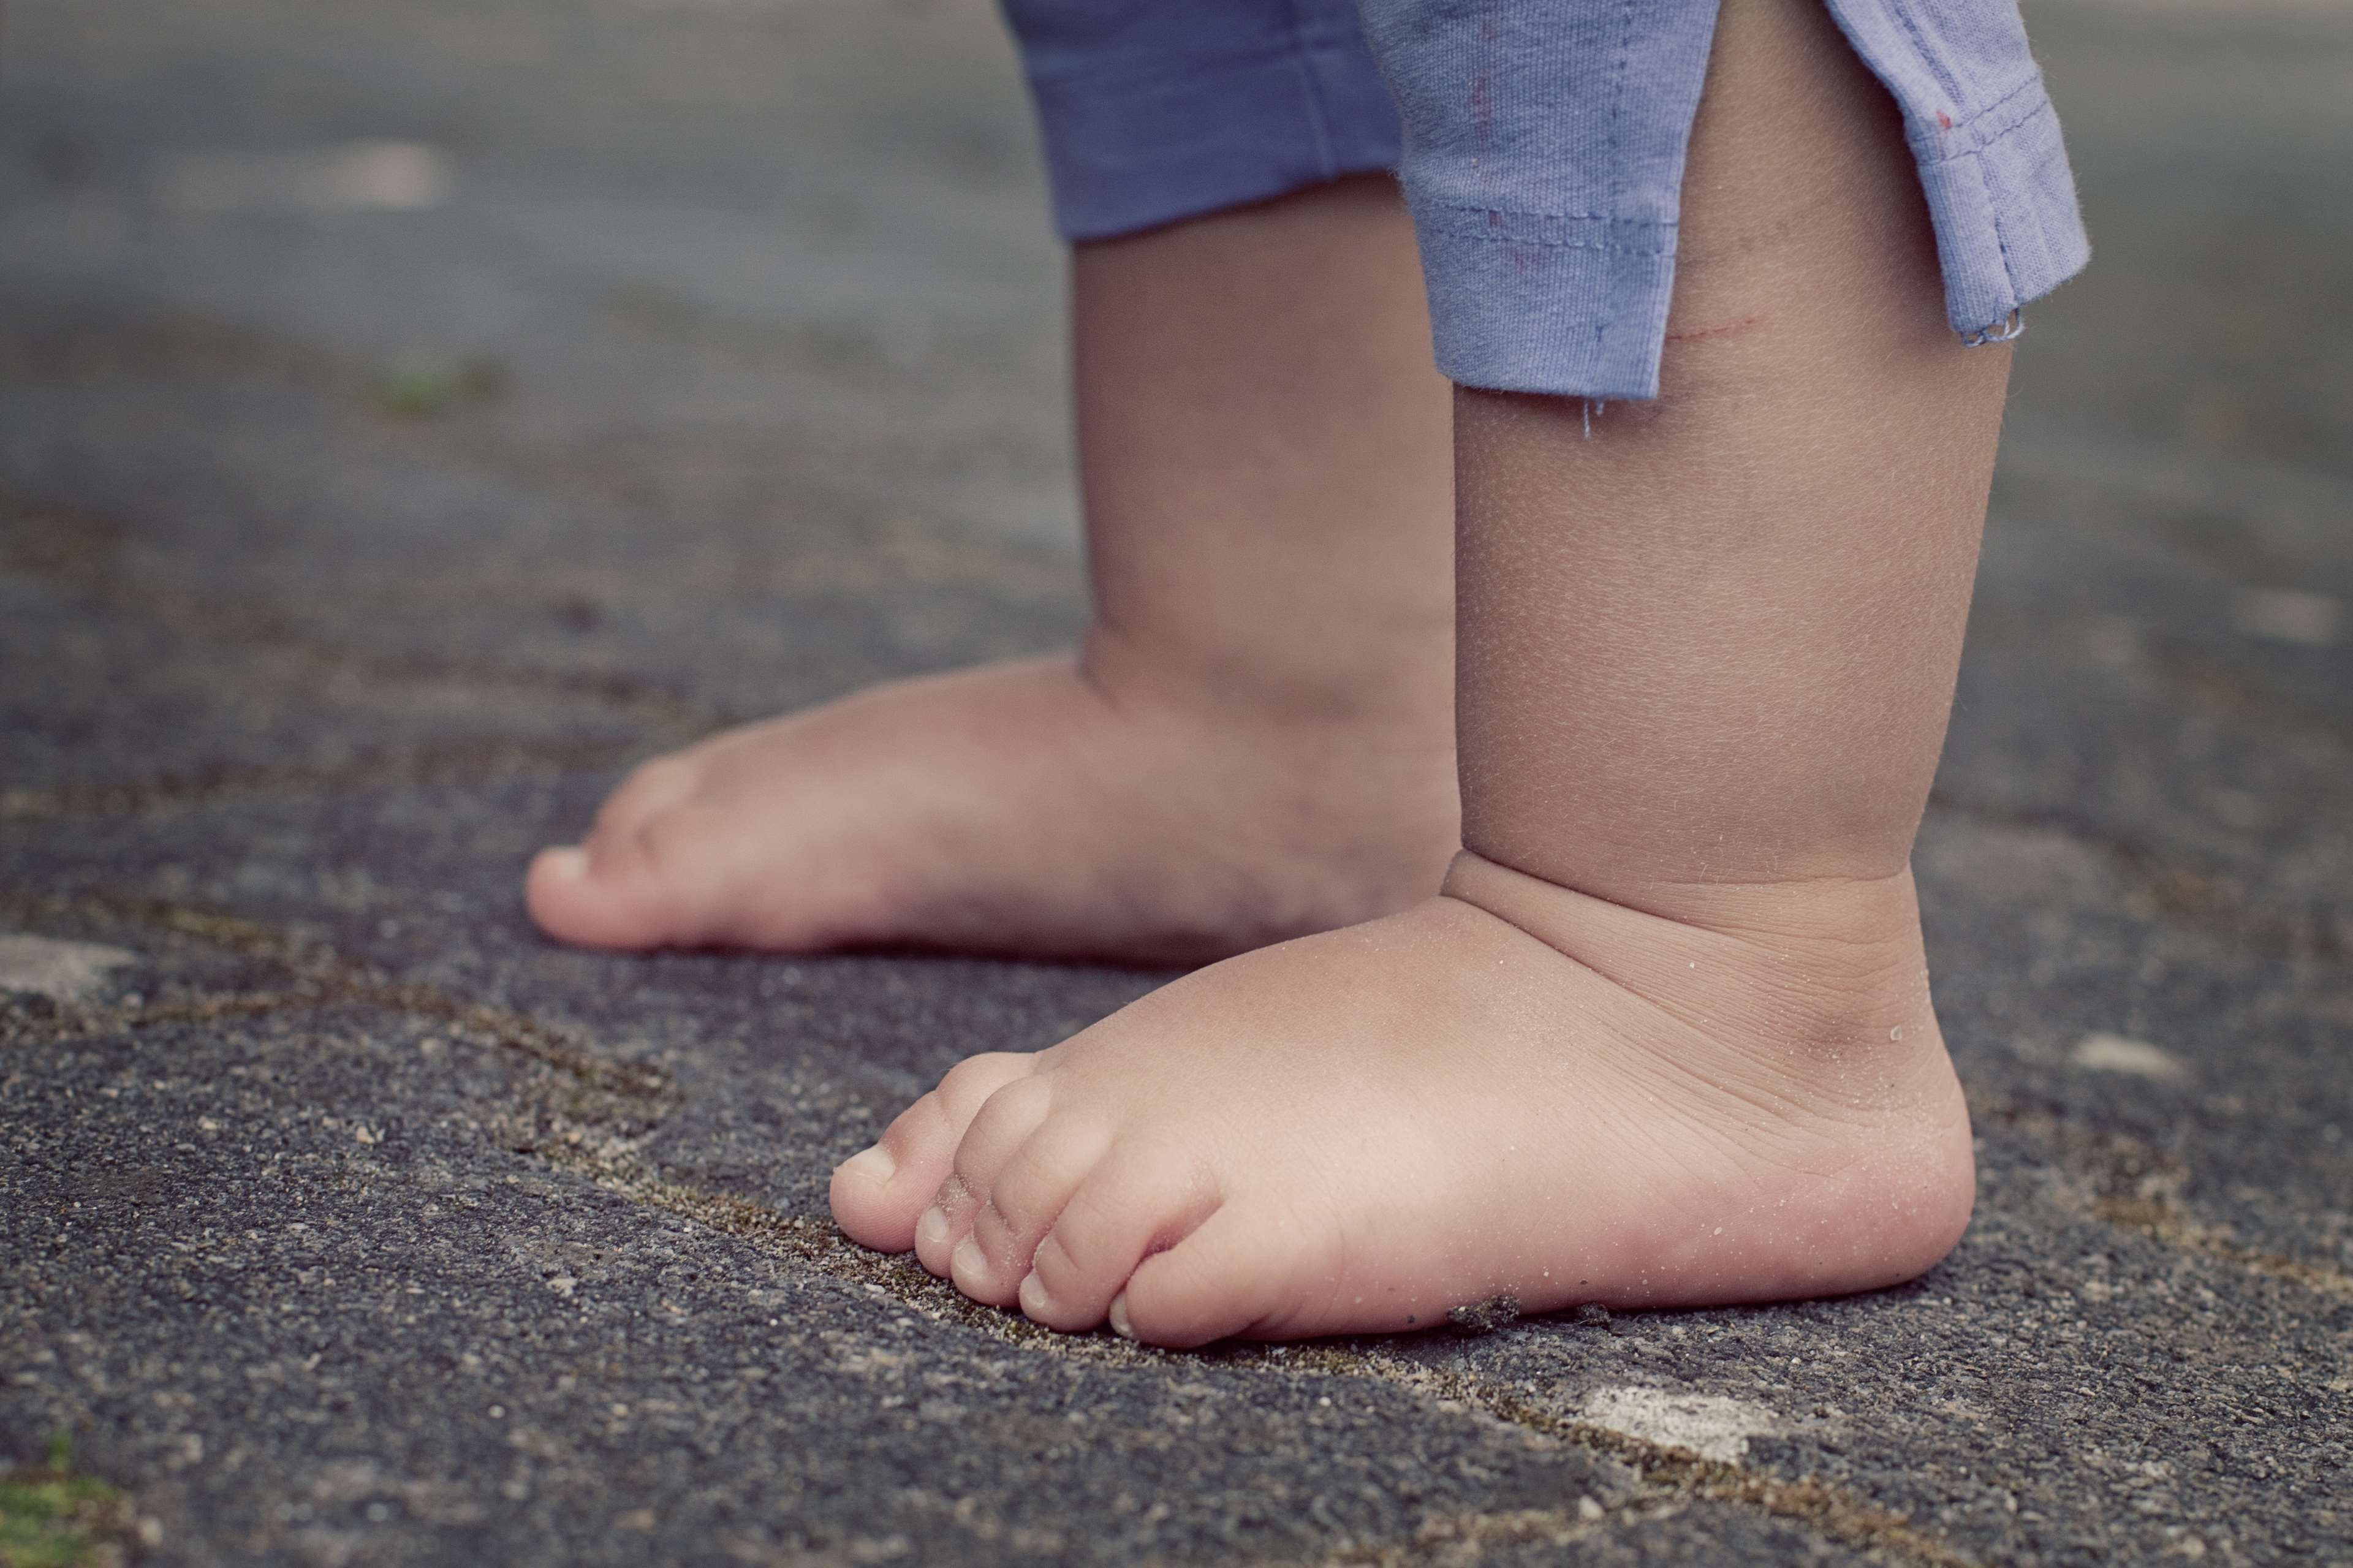 baby, barefoot, child, childrens feet, cute, human, part of the body